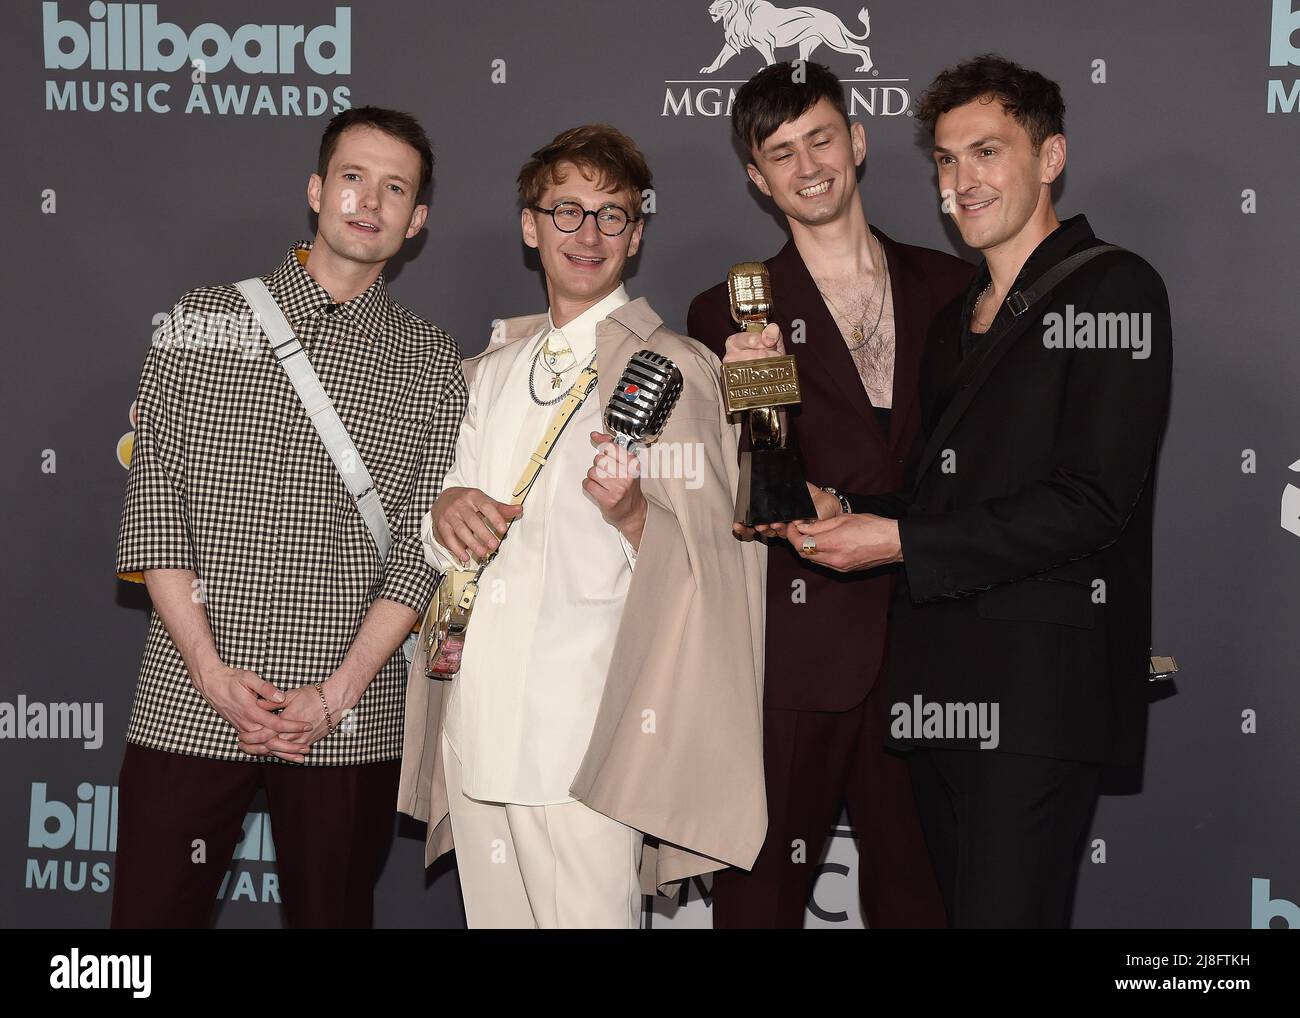 Glass Animals in the press room at the 2022 Billboard Music Awards at MGM Grand Garden Arena in Las Vegas, NV on May 15, 2022. (Photo By Scott Kirkland/Sipa USA) Stock Photo